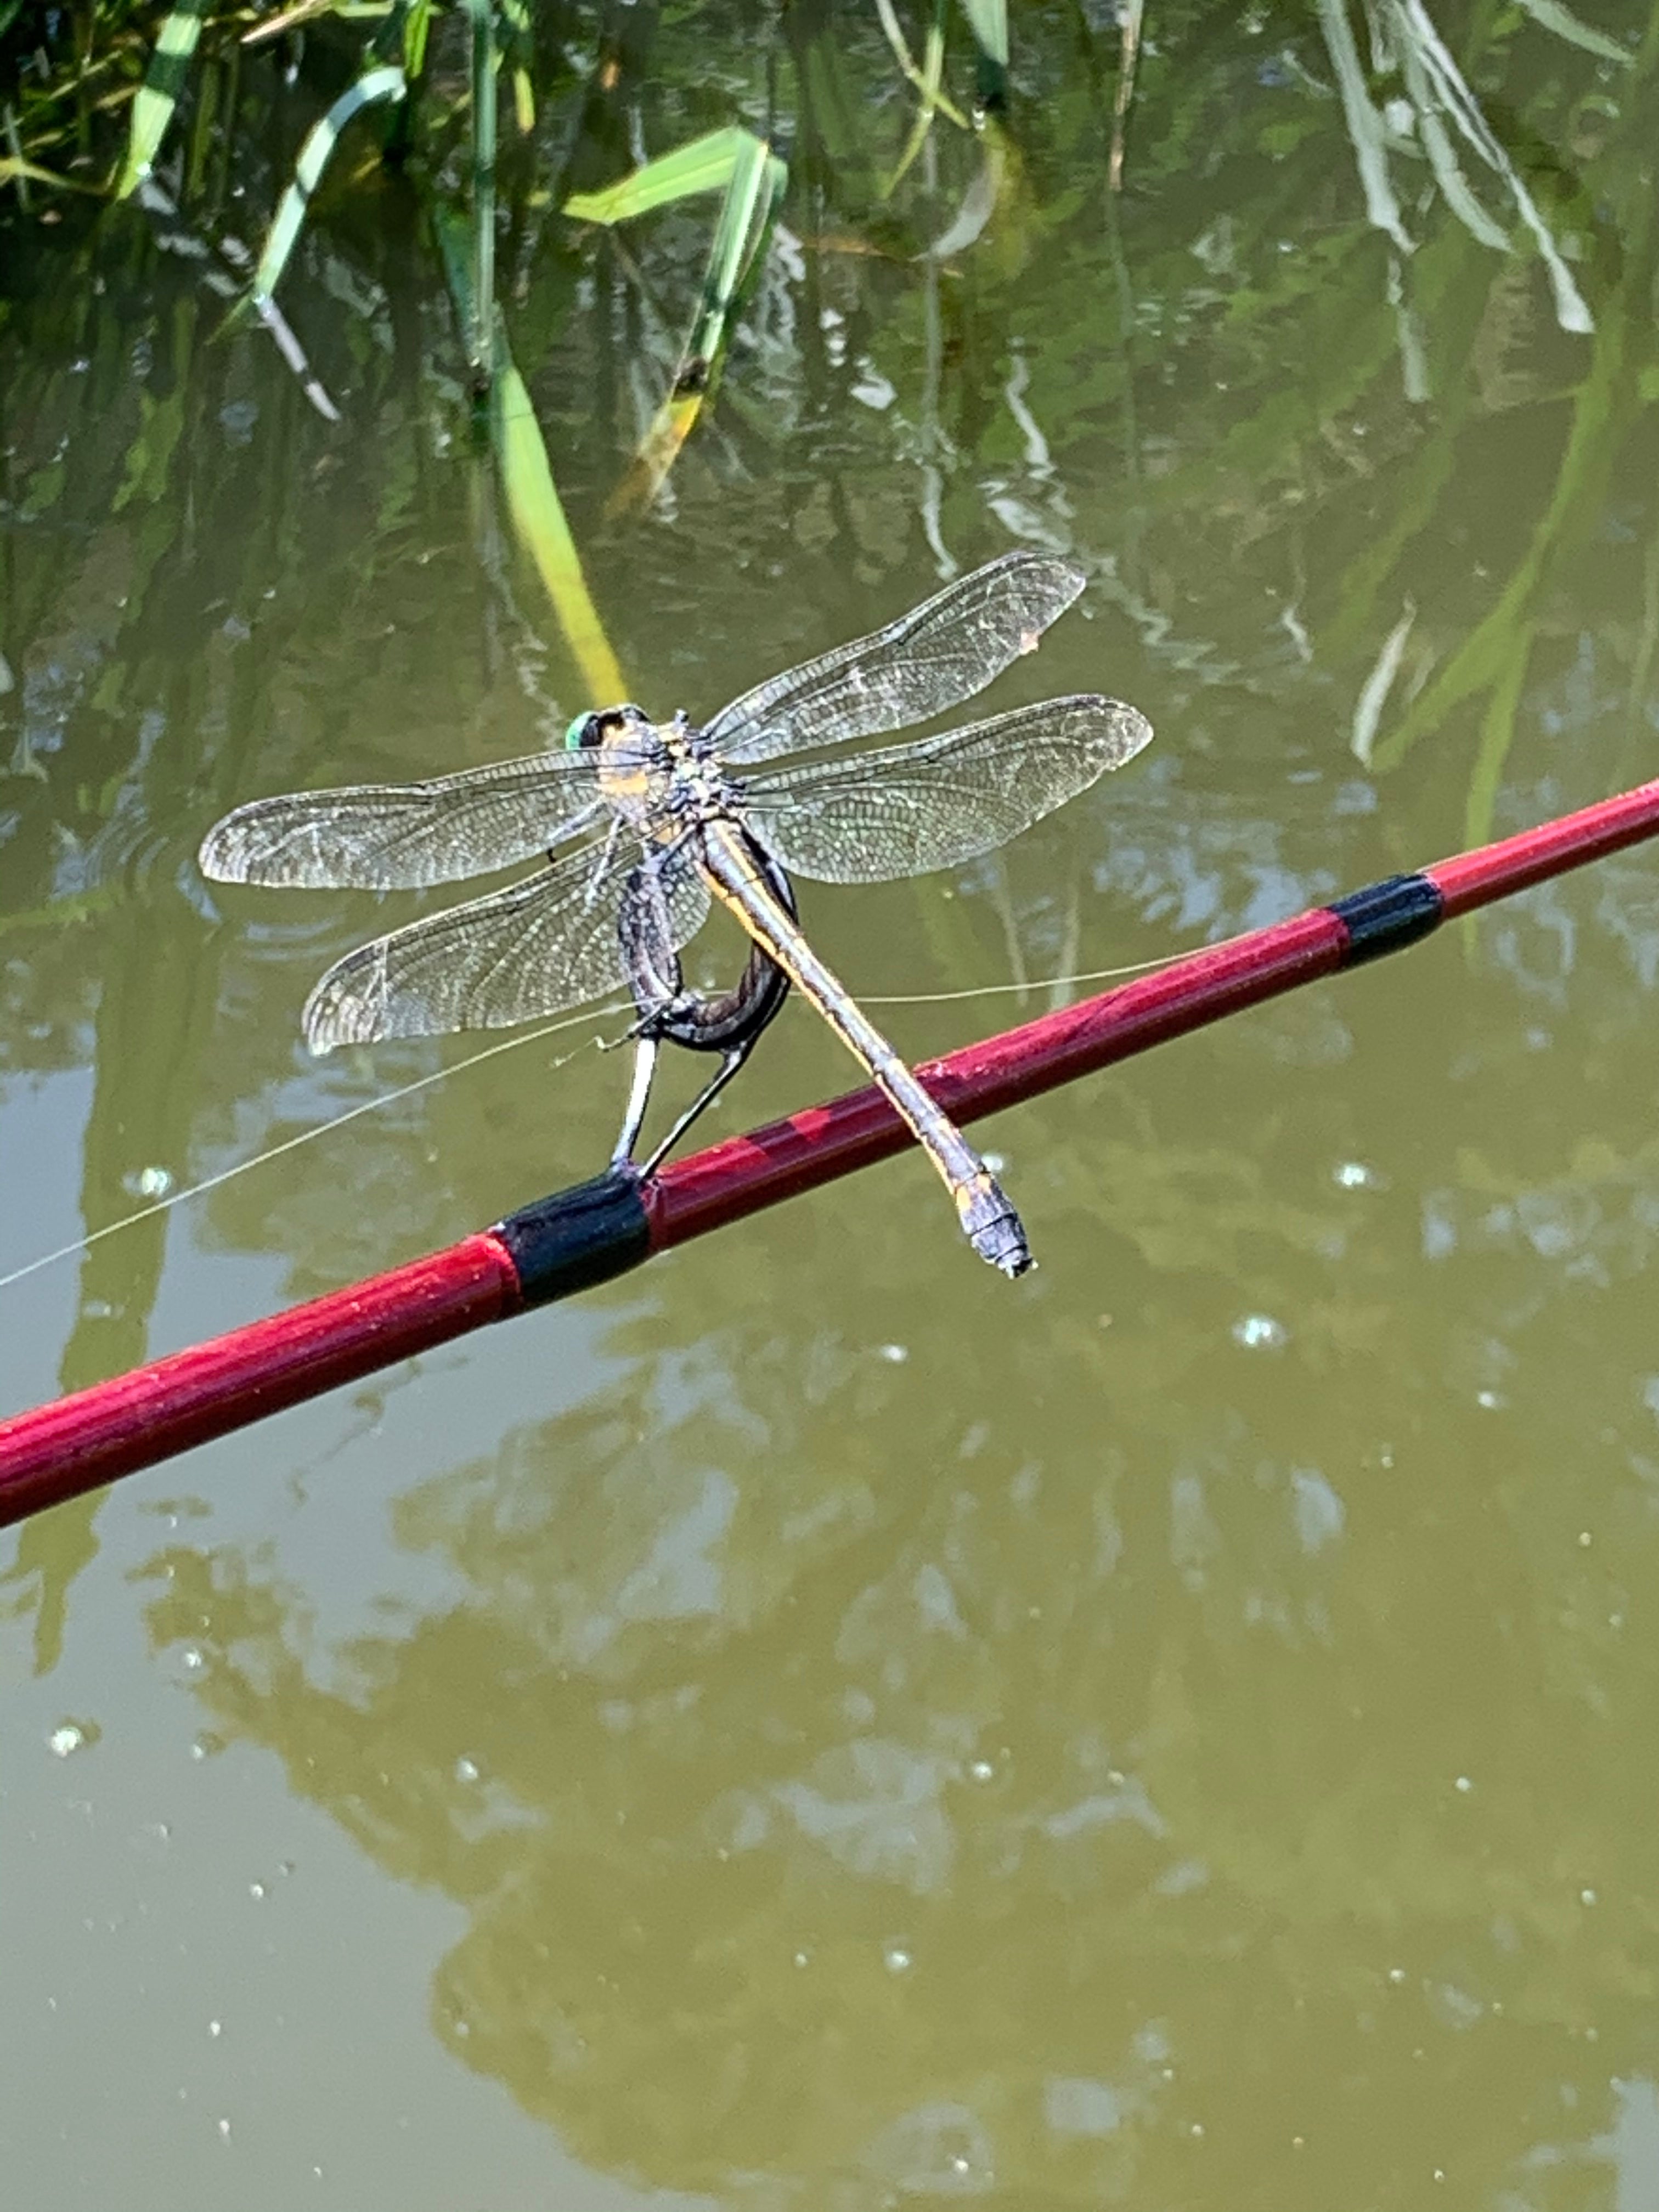 For dragonfly lovers, they were everywhere